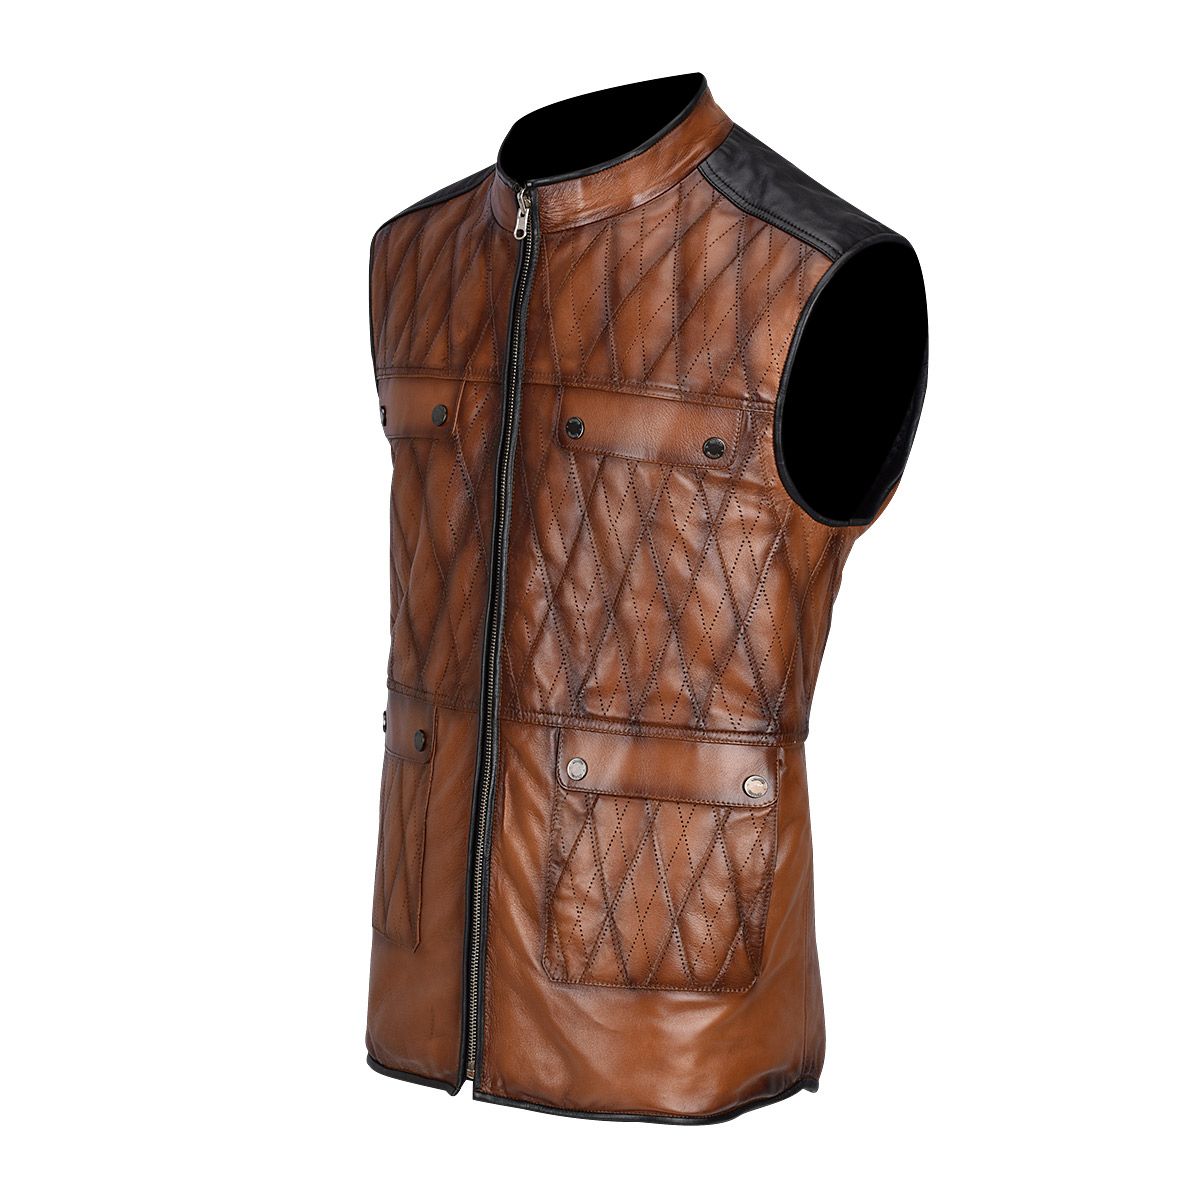 H302COB- Cuadra maple casual fashion quilted goat leather racer vest for men-Kuet.us - Cuadra Boots - Western Cowboy, Casual Fashion and Dress Boots